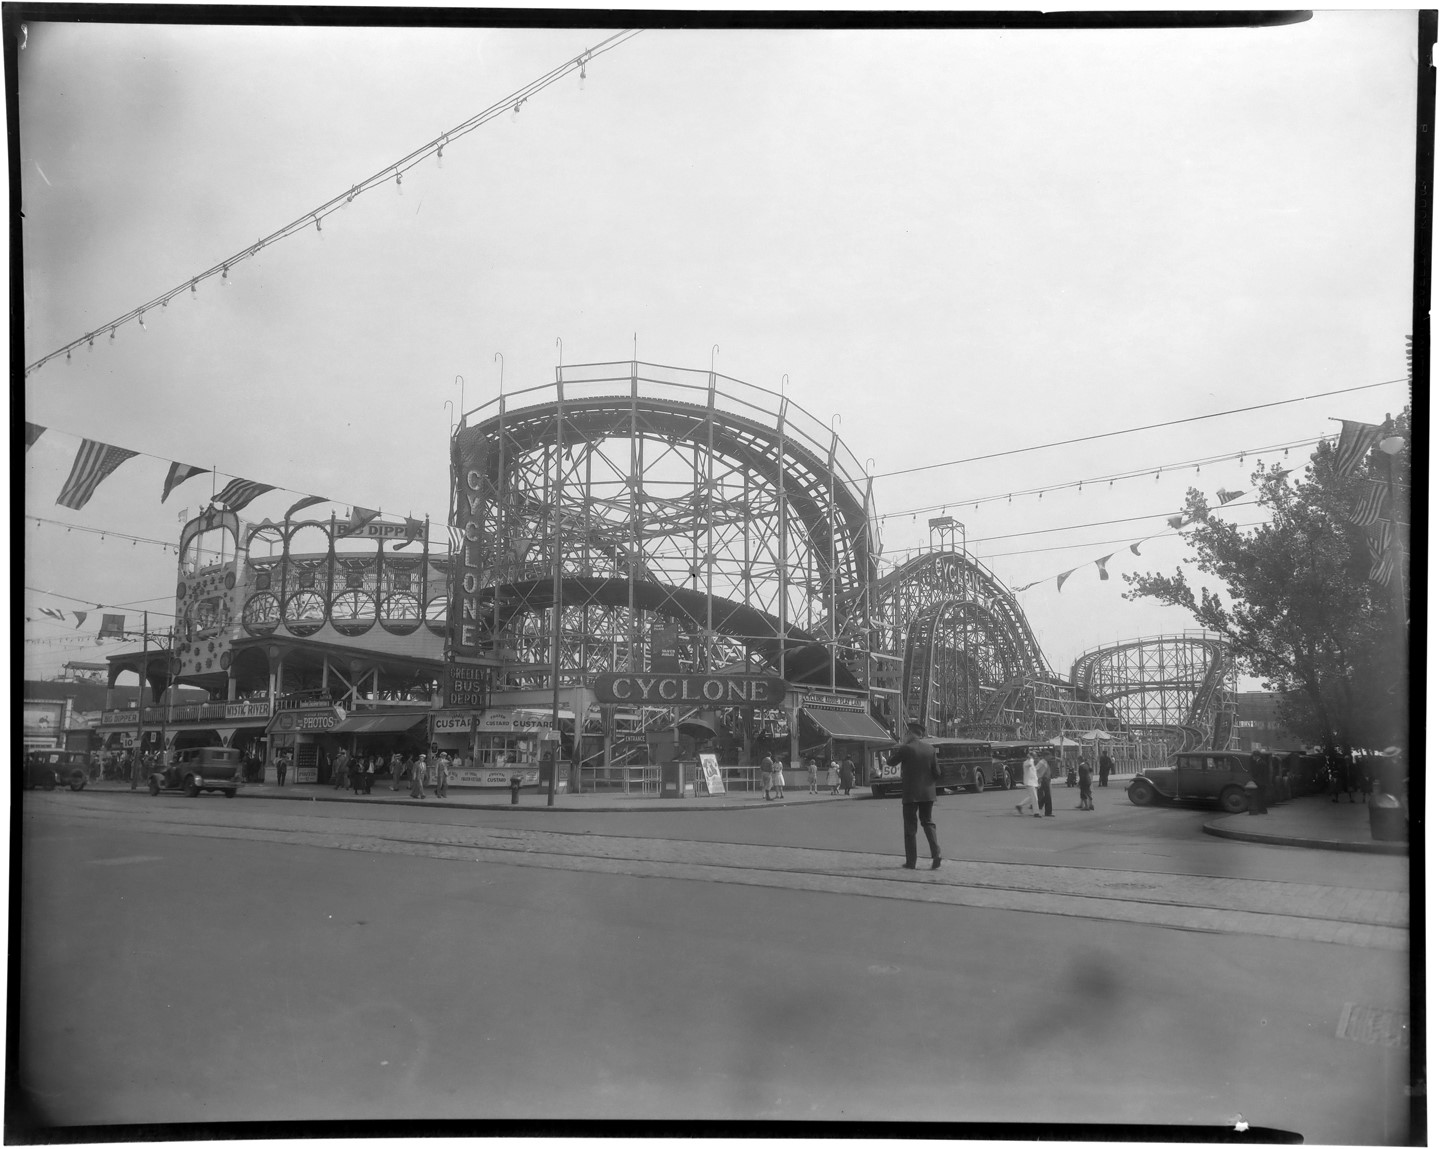 The Brown Brothers Collection - 1930s Coney Island "Cyclone" Roller Coaster Original Negative